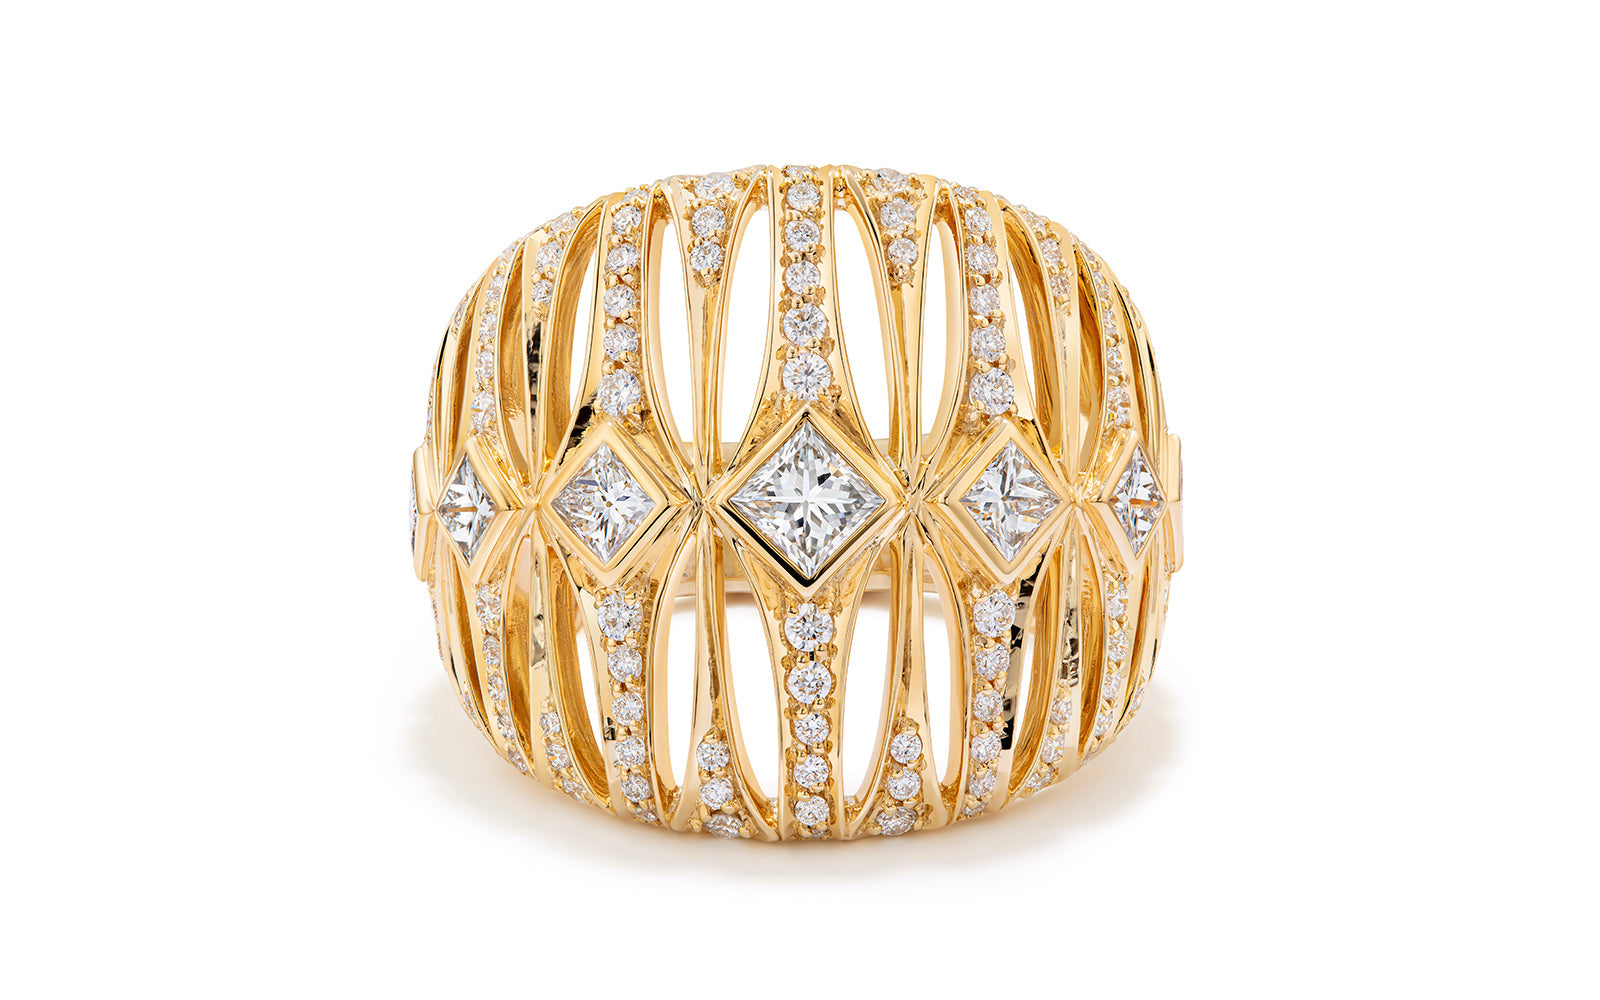 1.49ct D Flawless Diamond Ring set in 18K Yellow Gold